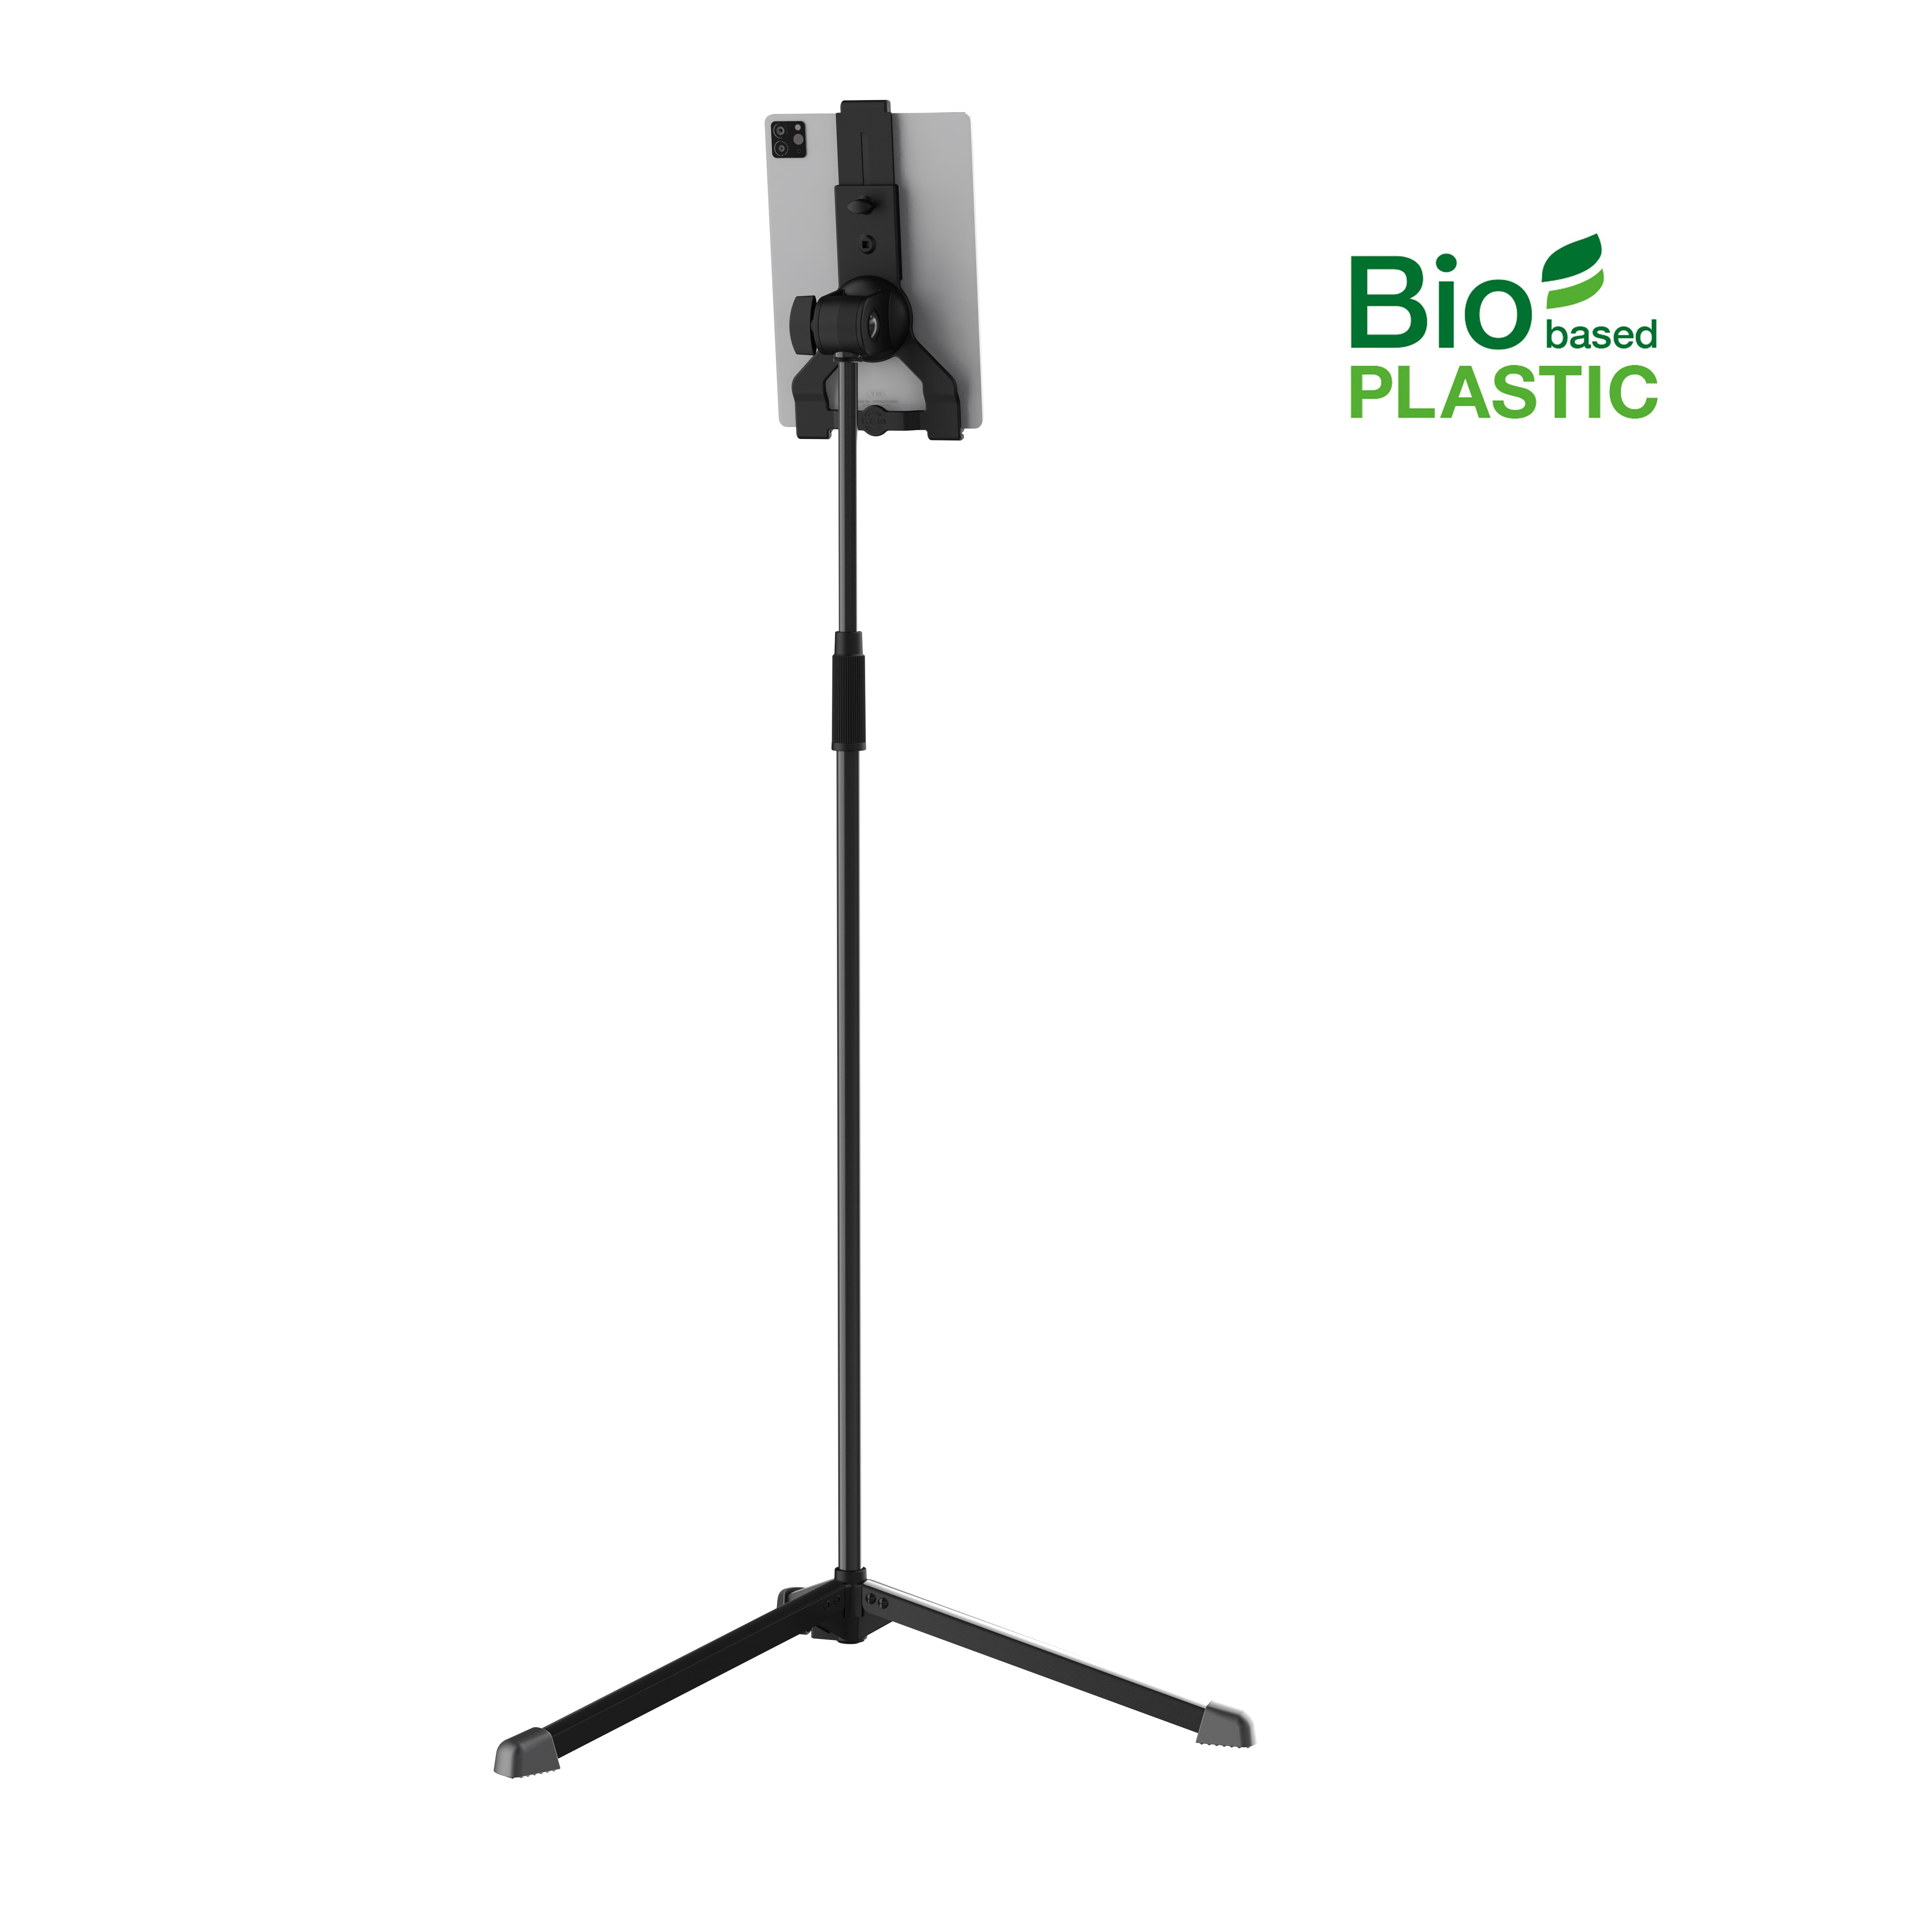 19767 Tablet PC stand "Biobased